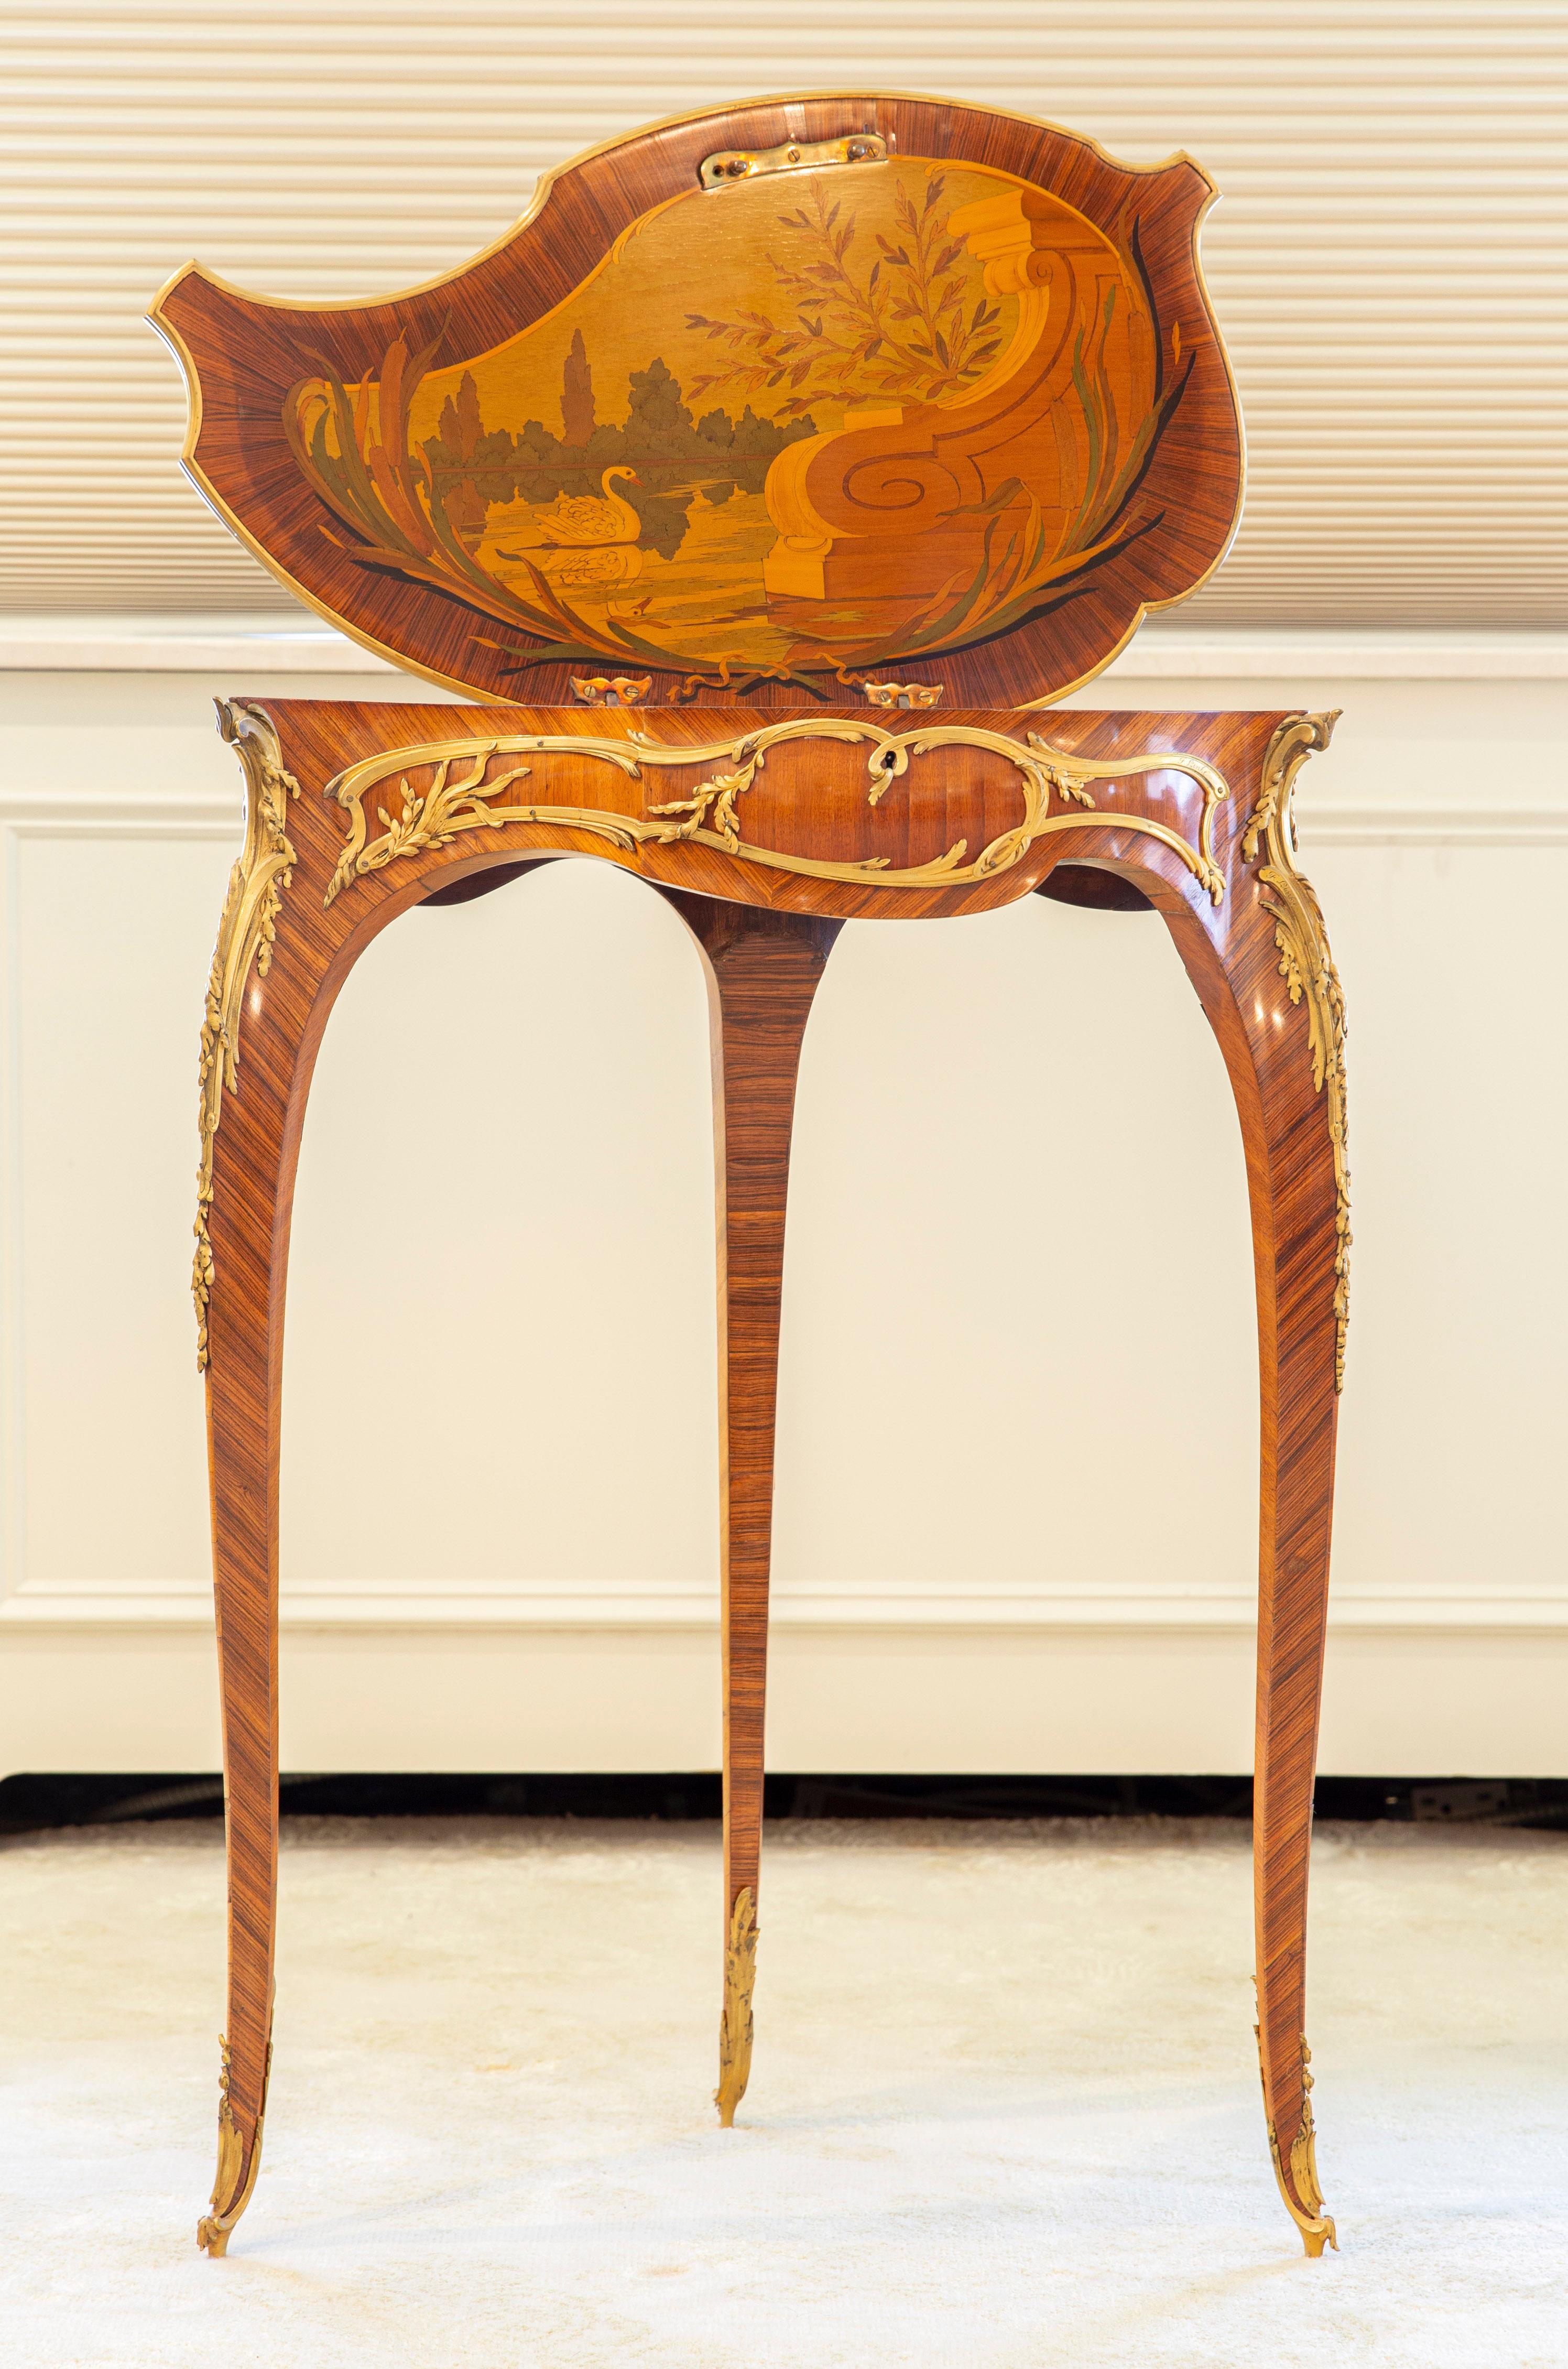 Belle Époque A Very Special Gilt Bronze Mounted Marquetry “Coquille” Table by François Linke For Sale